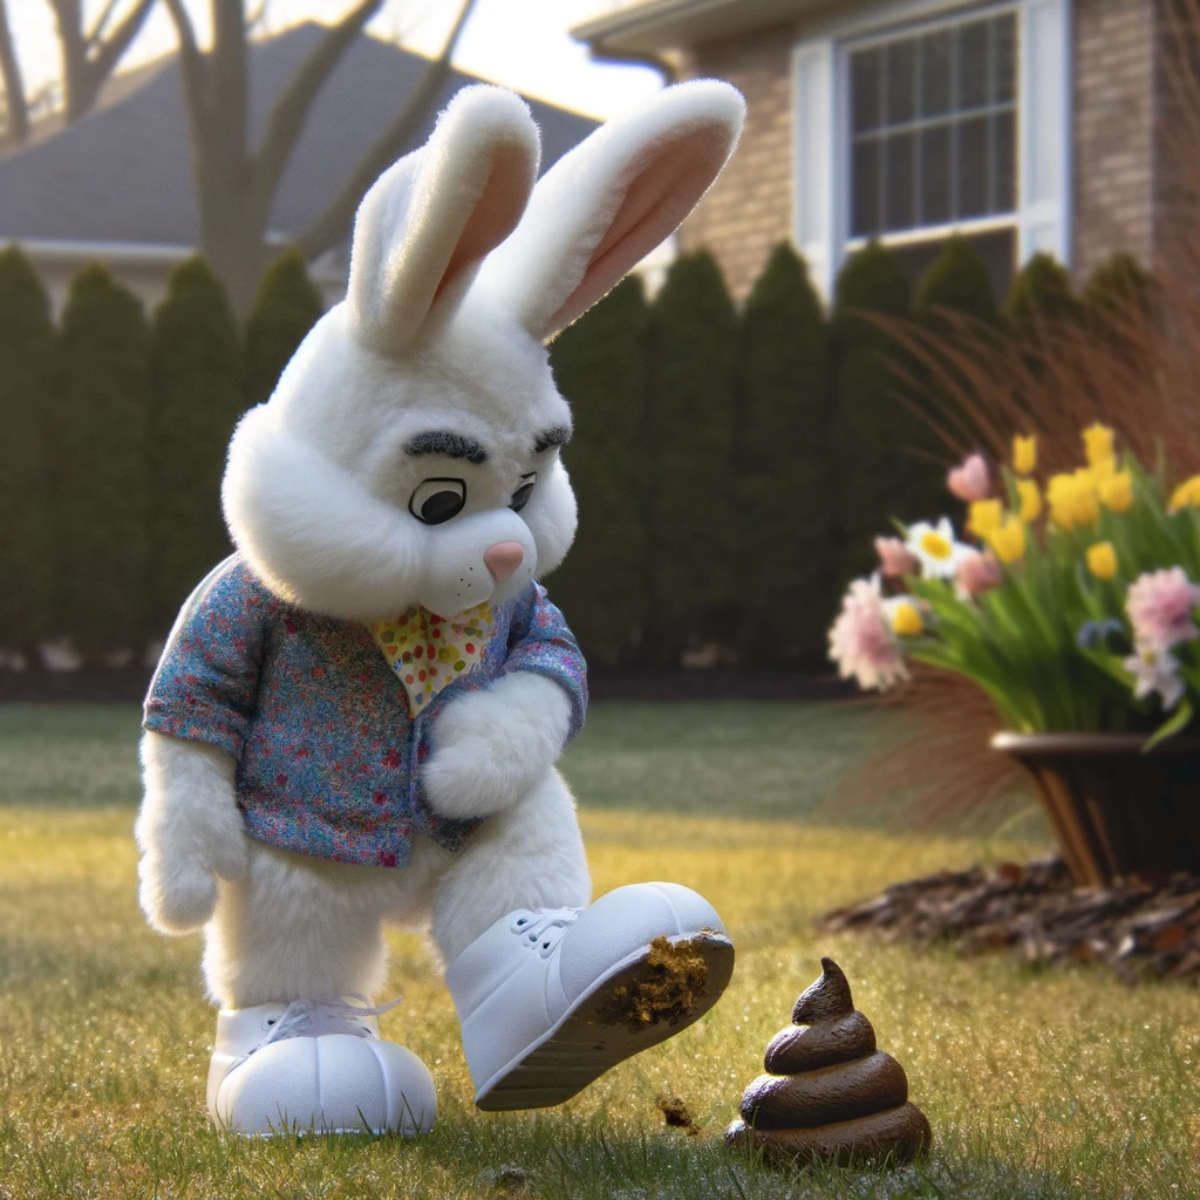 Easter Bunny in a quandary, one foot lifted, having stepped in an unfortunate surprise while hiding eggs, with a picturesque suburban background.